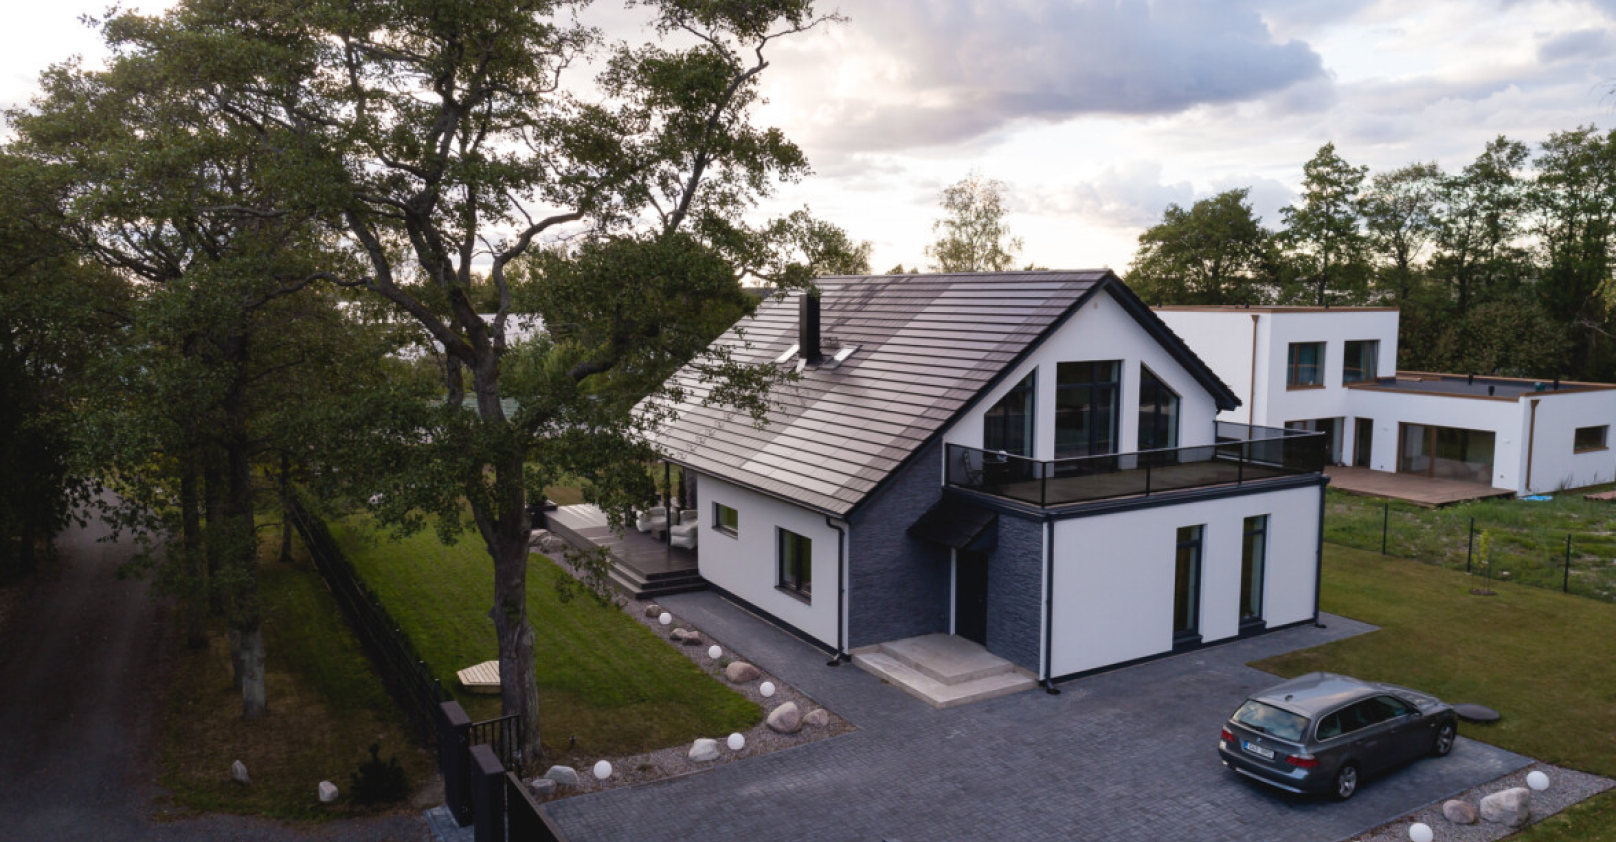 modern house with solar tiled roof and car